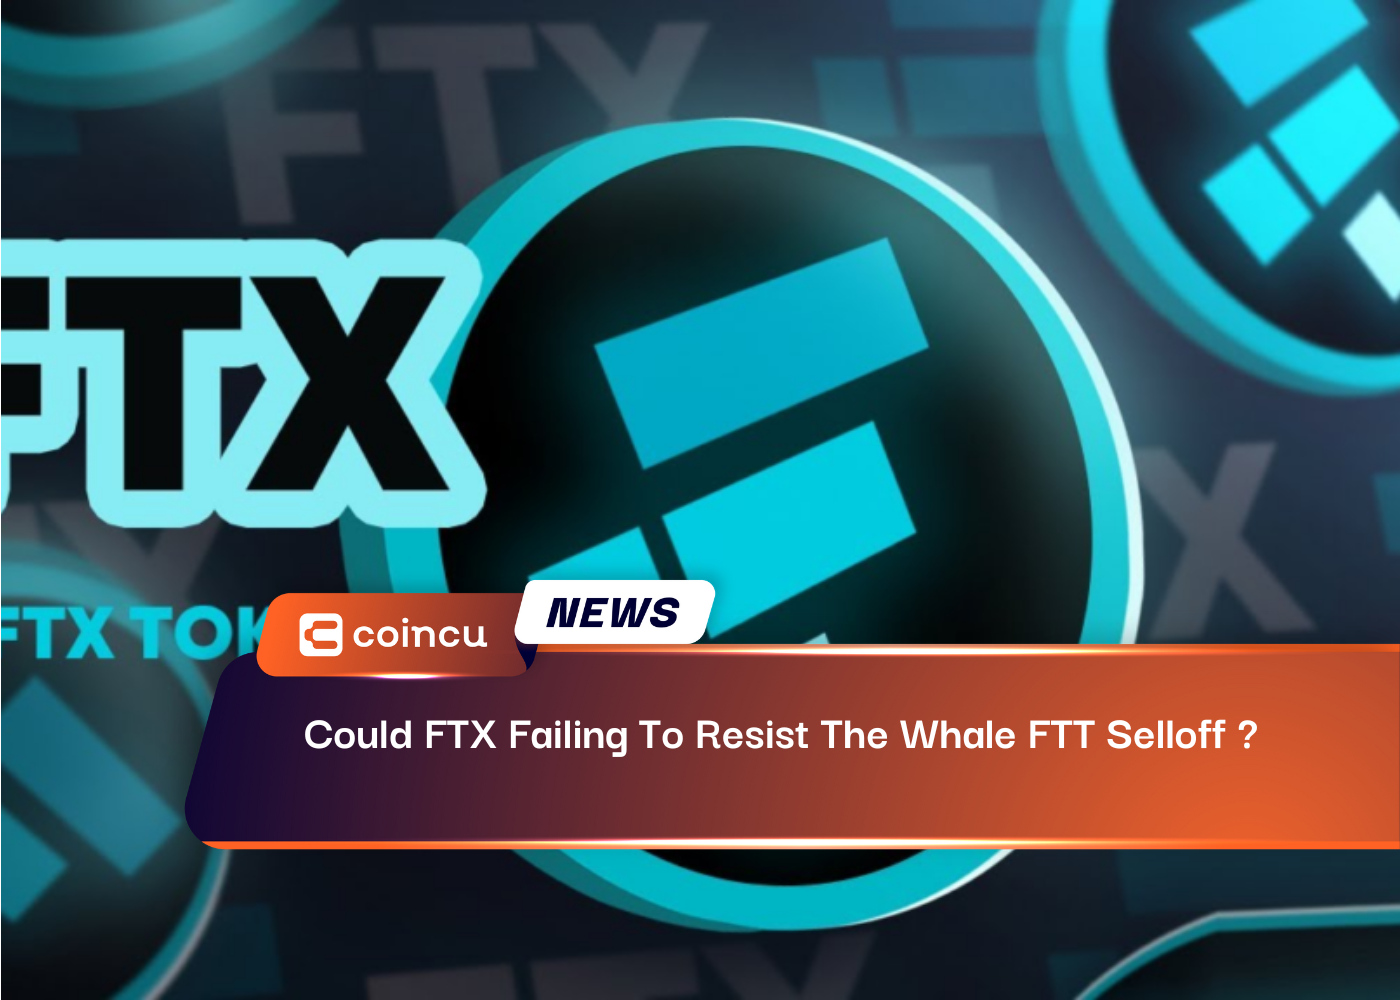 Could FTX Failing To Resist The Whale FTT Selloff ?